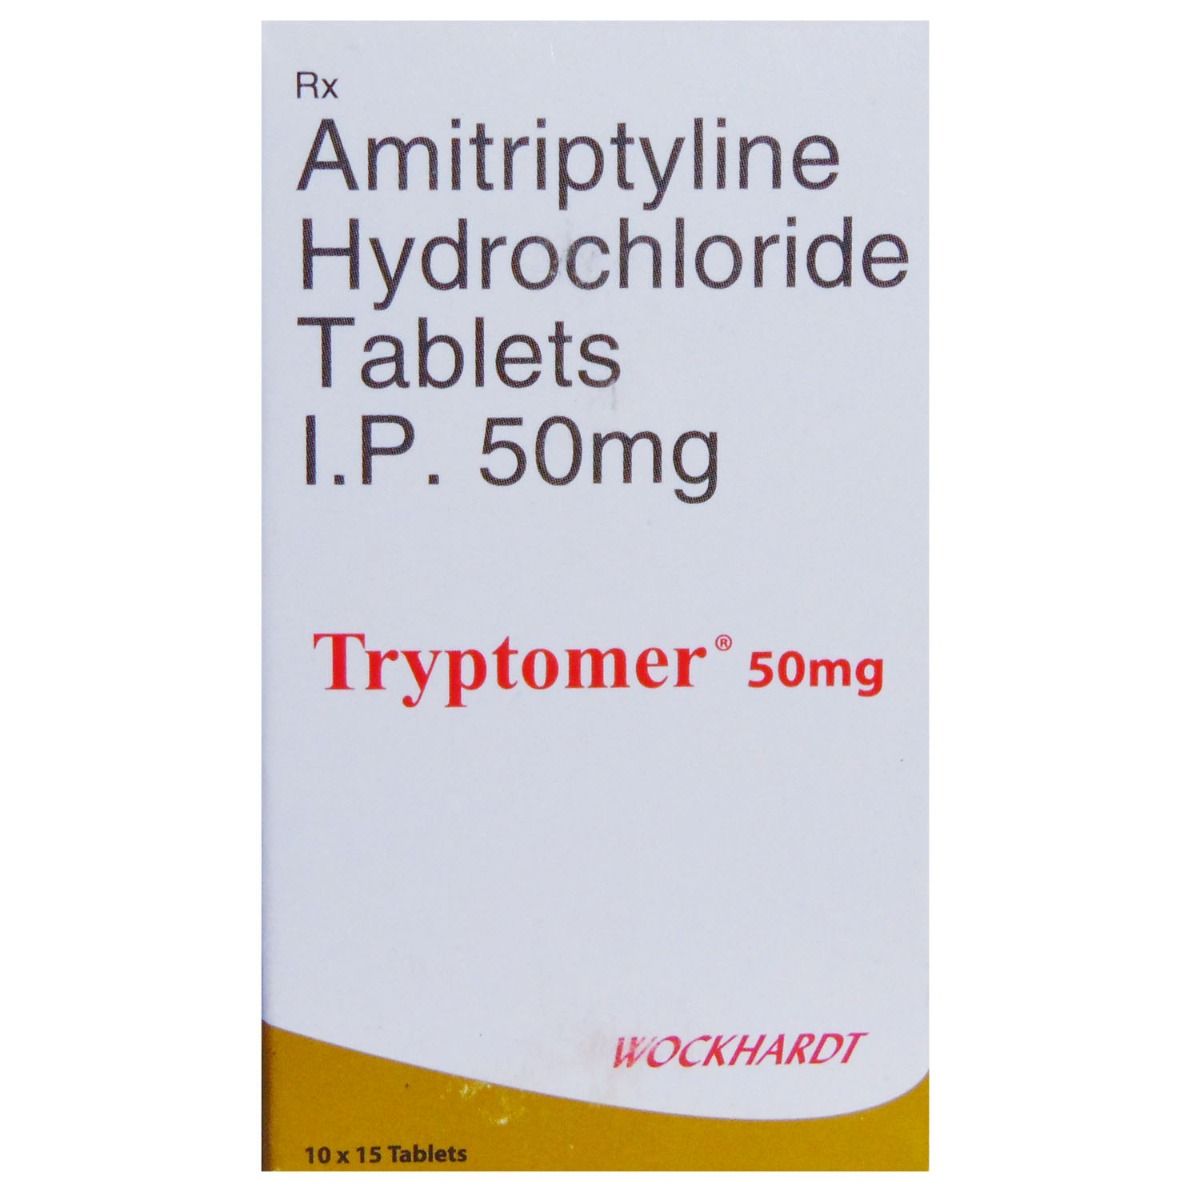 Tryptomer 50mg Tablet 15's, Pack of 15 TABLETS